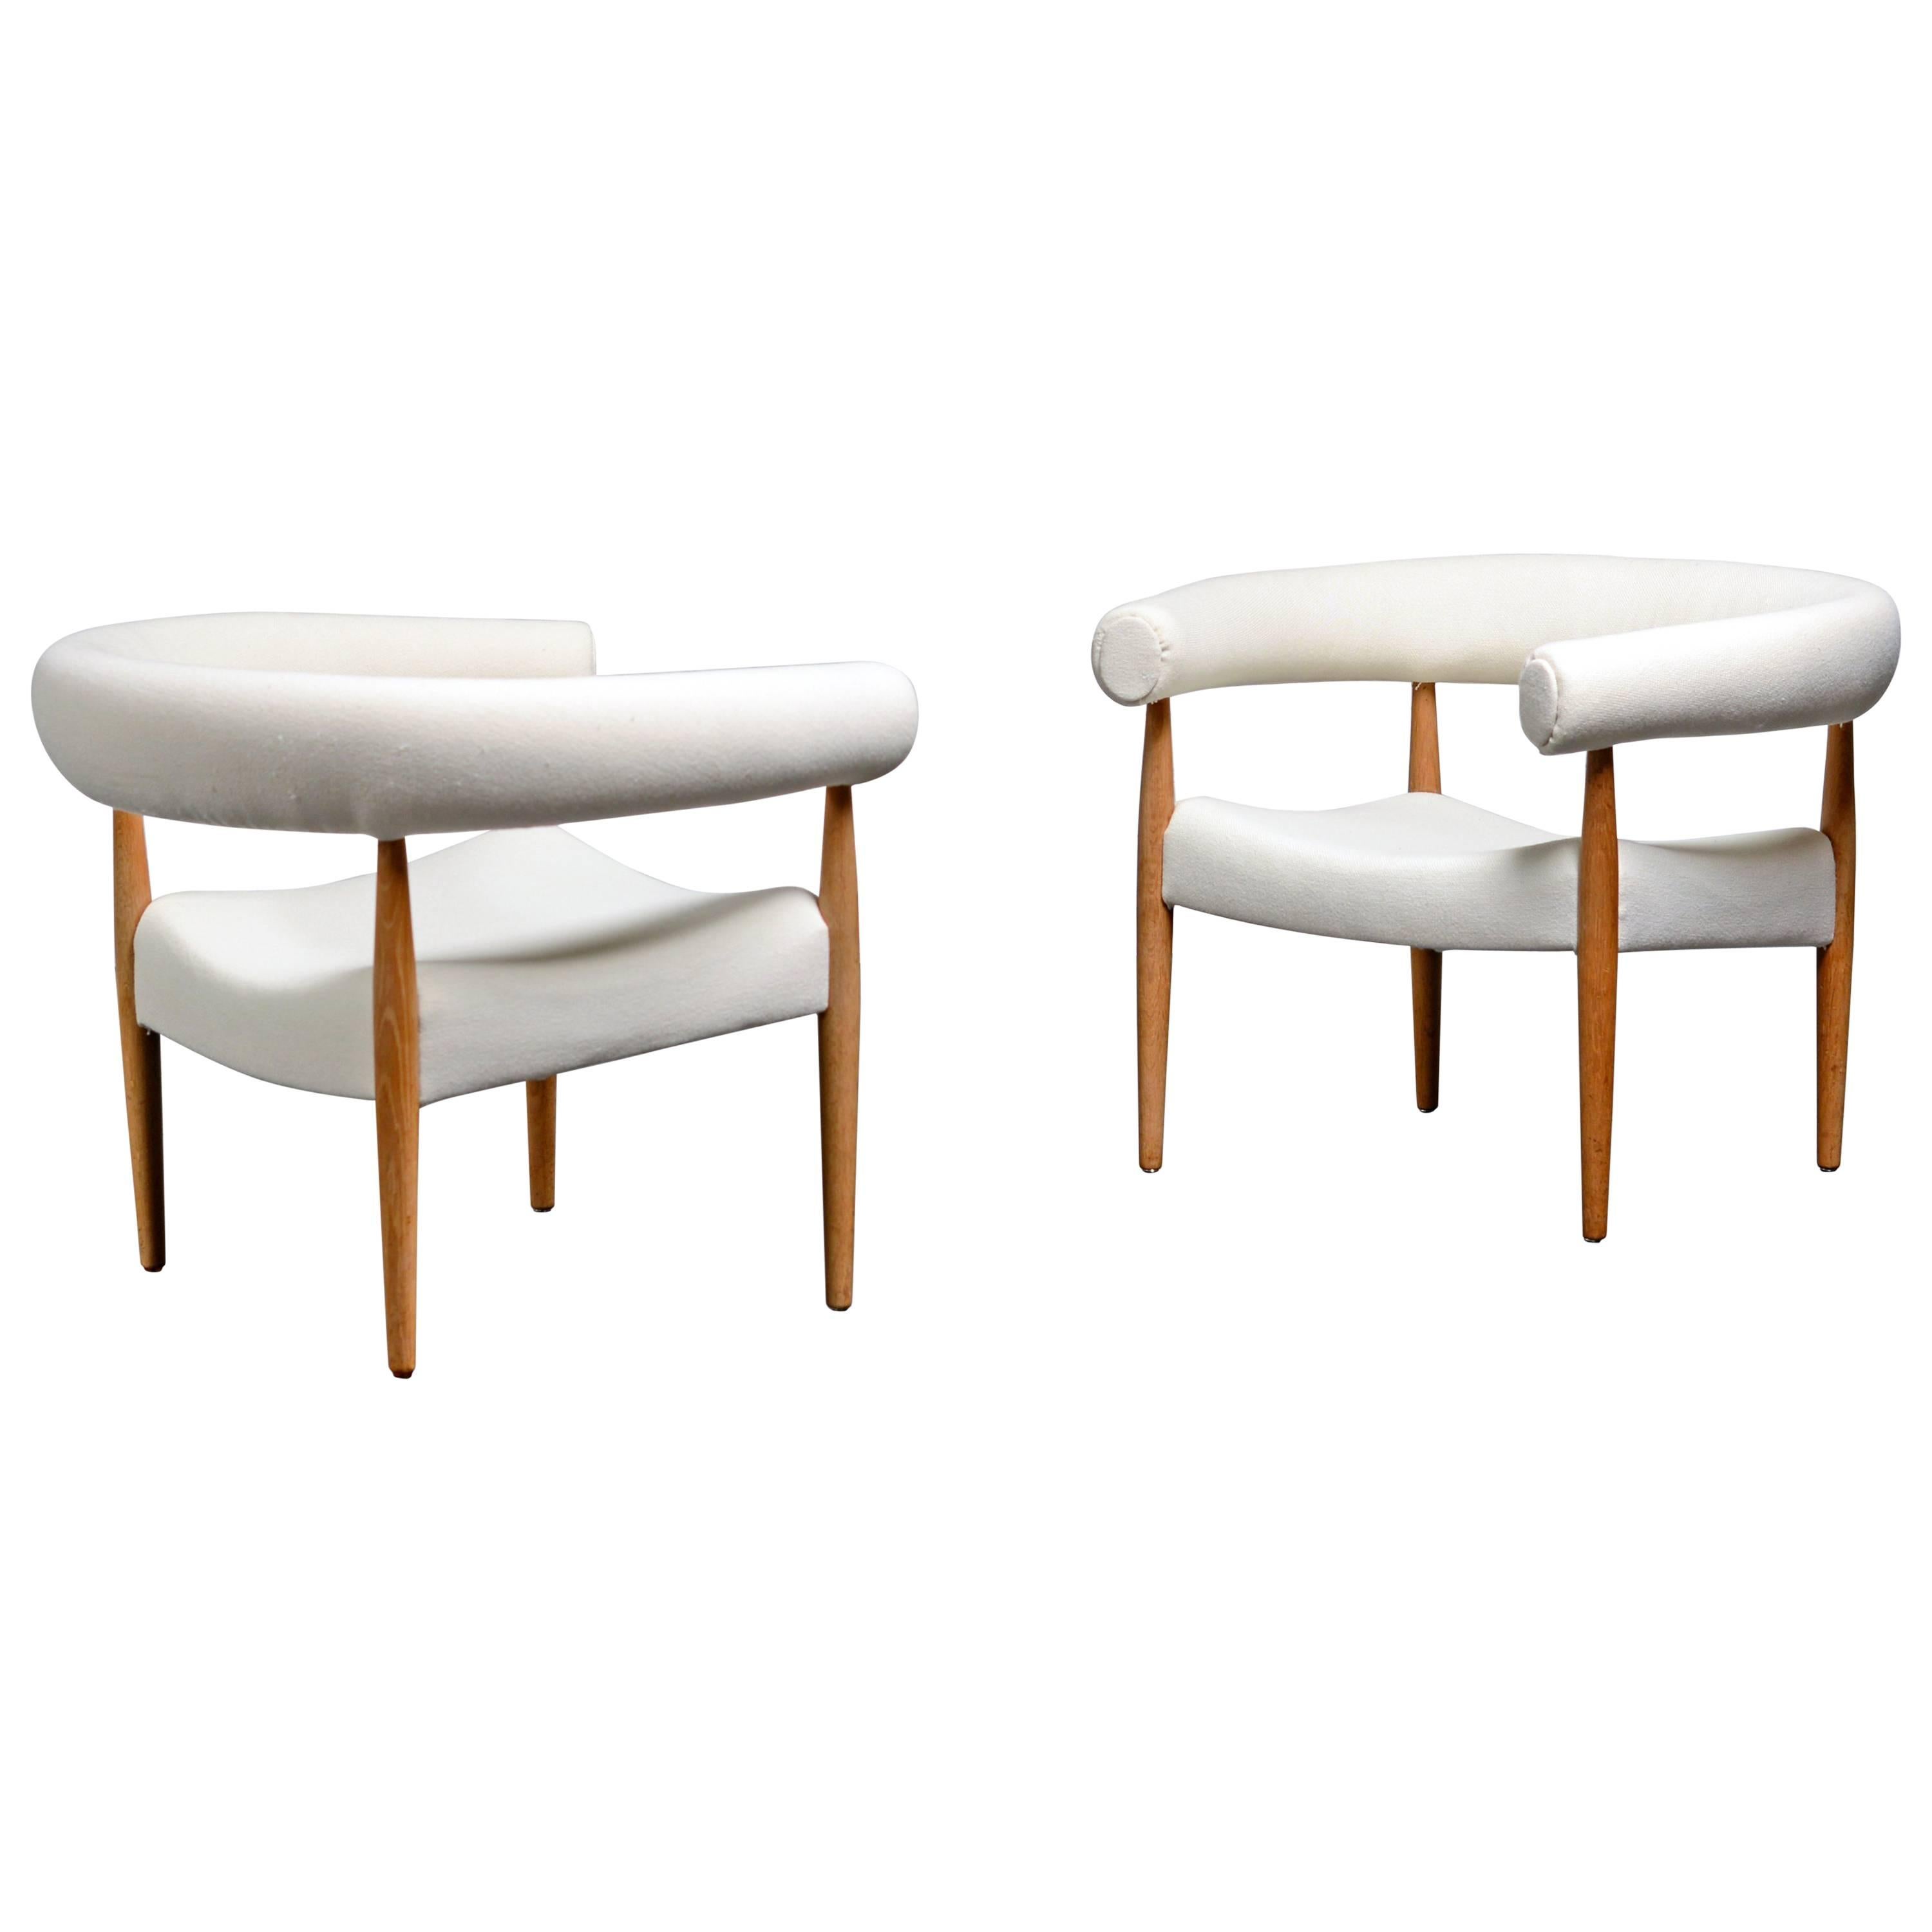 Nanna Ditzel Pair of Sausage Easy Chairs Made by Kolds Savværk, 1958 For Sale